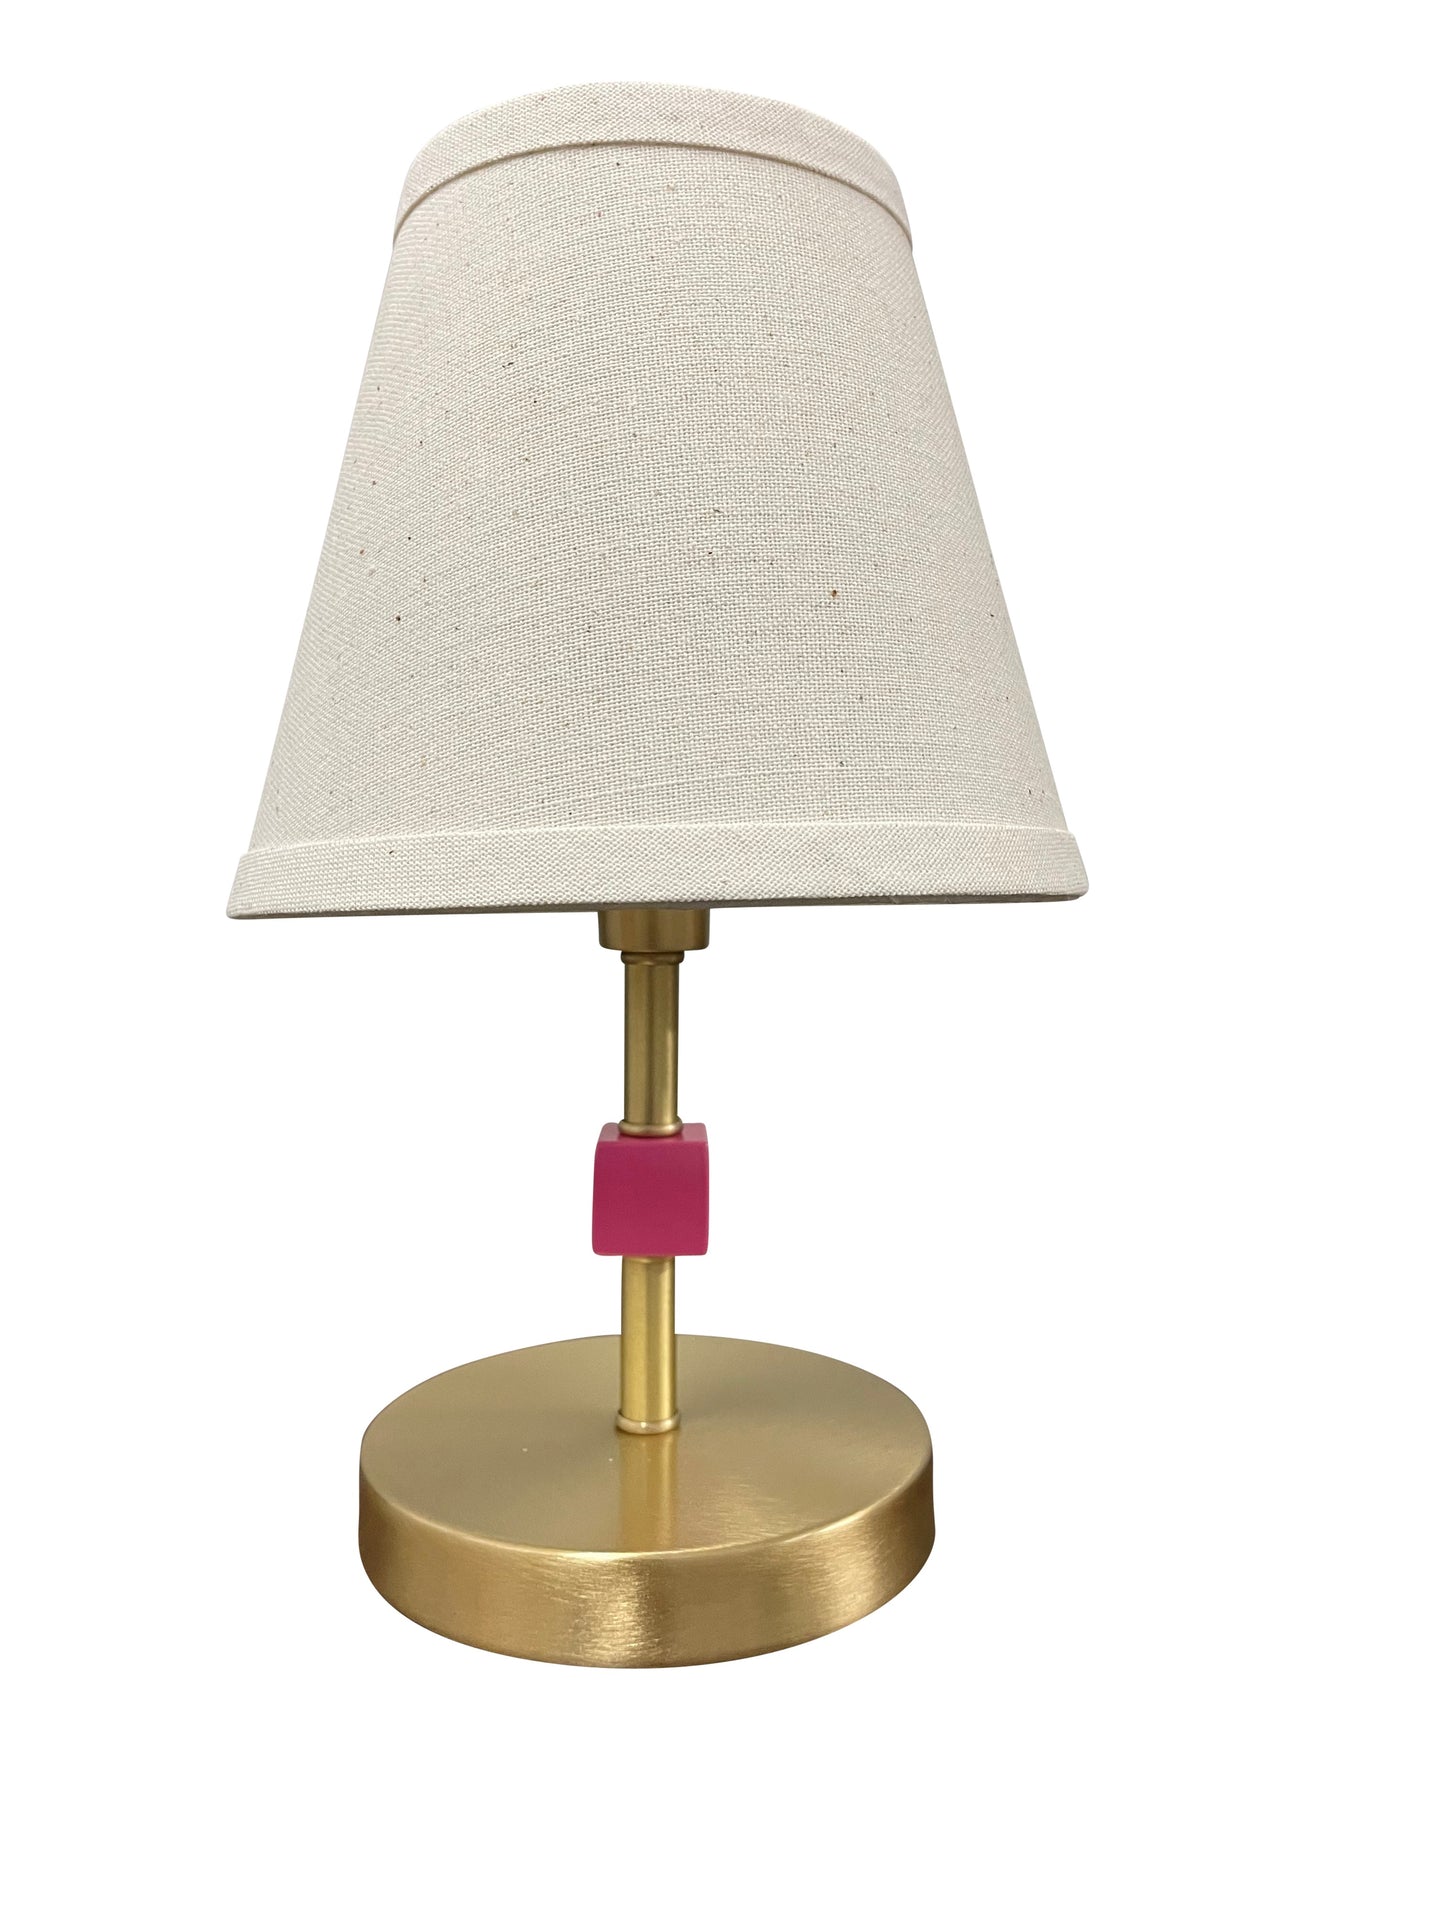 Bryson Mini Satin Brass Orchid Accent Lamp by House of Troy